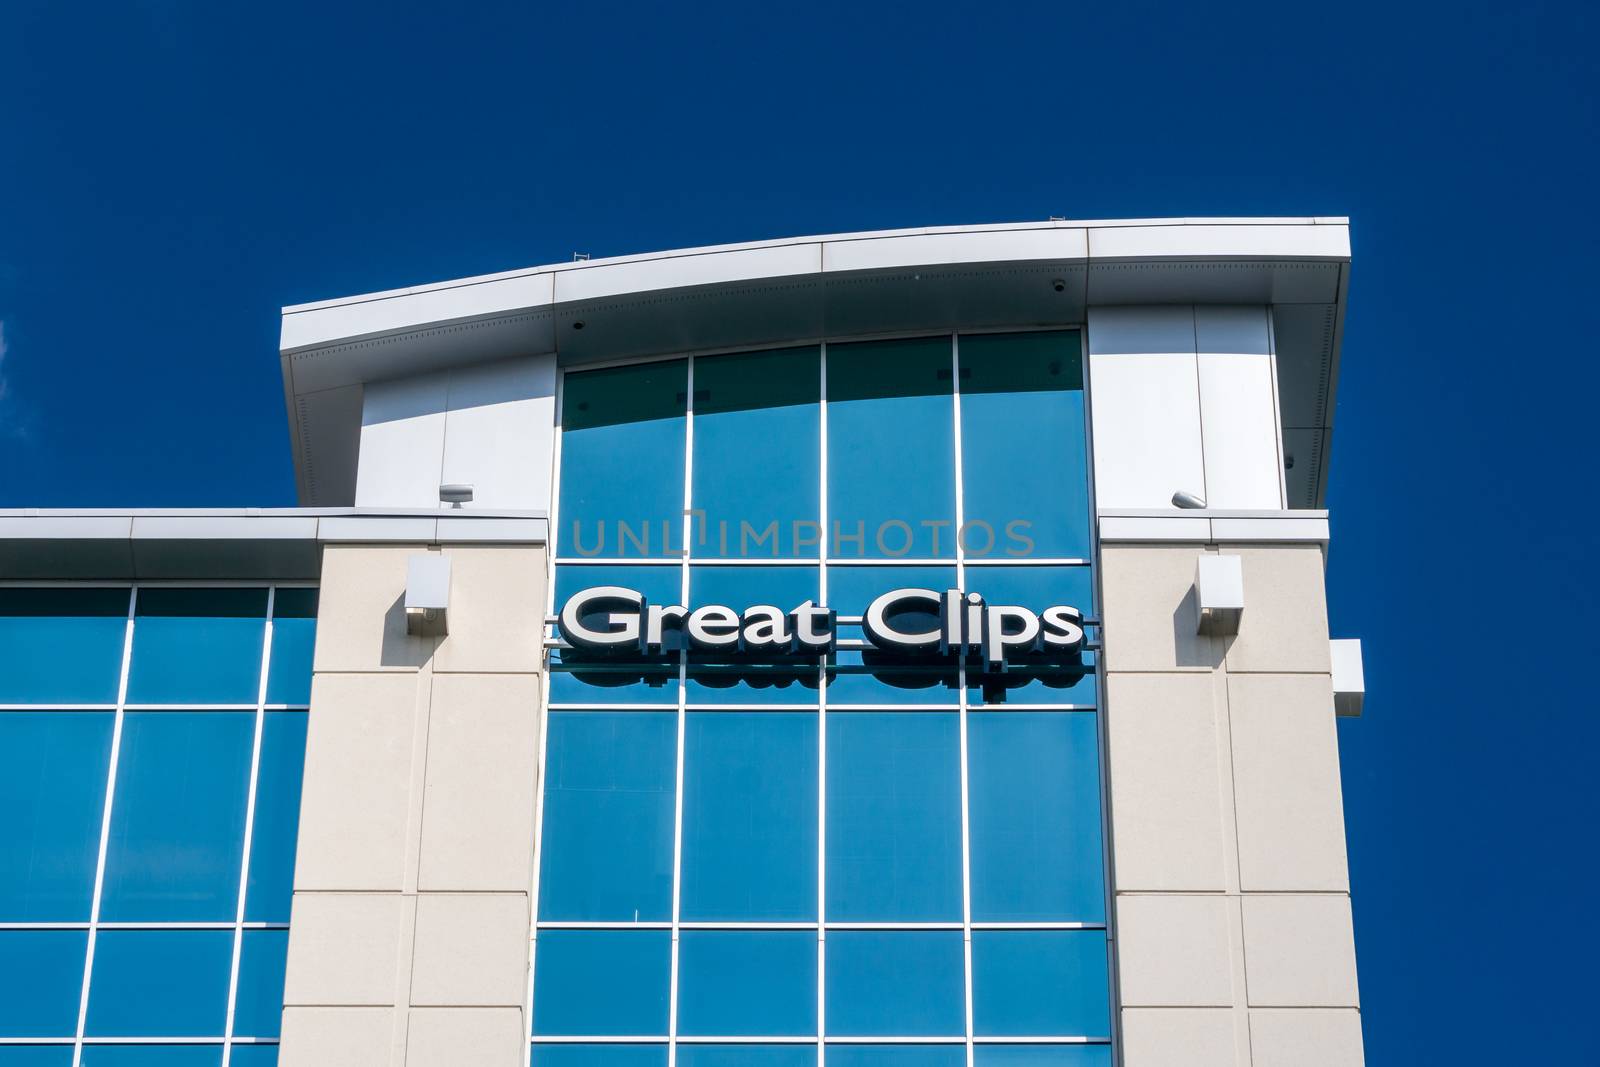 BLOOMINGTON, MN/USA - MAY 29, 2016: Great Clips corporate office headquarters. Great Clips is a hair salon franchise with over 3,700 locations across the United States and Canada.